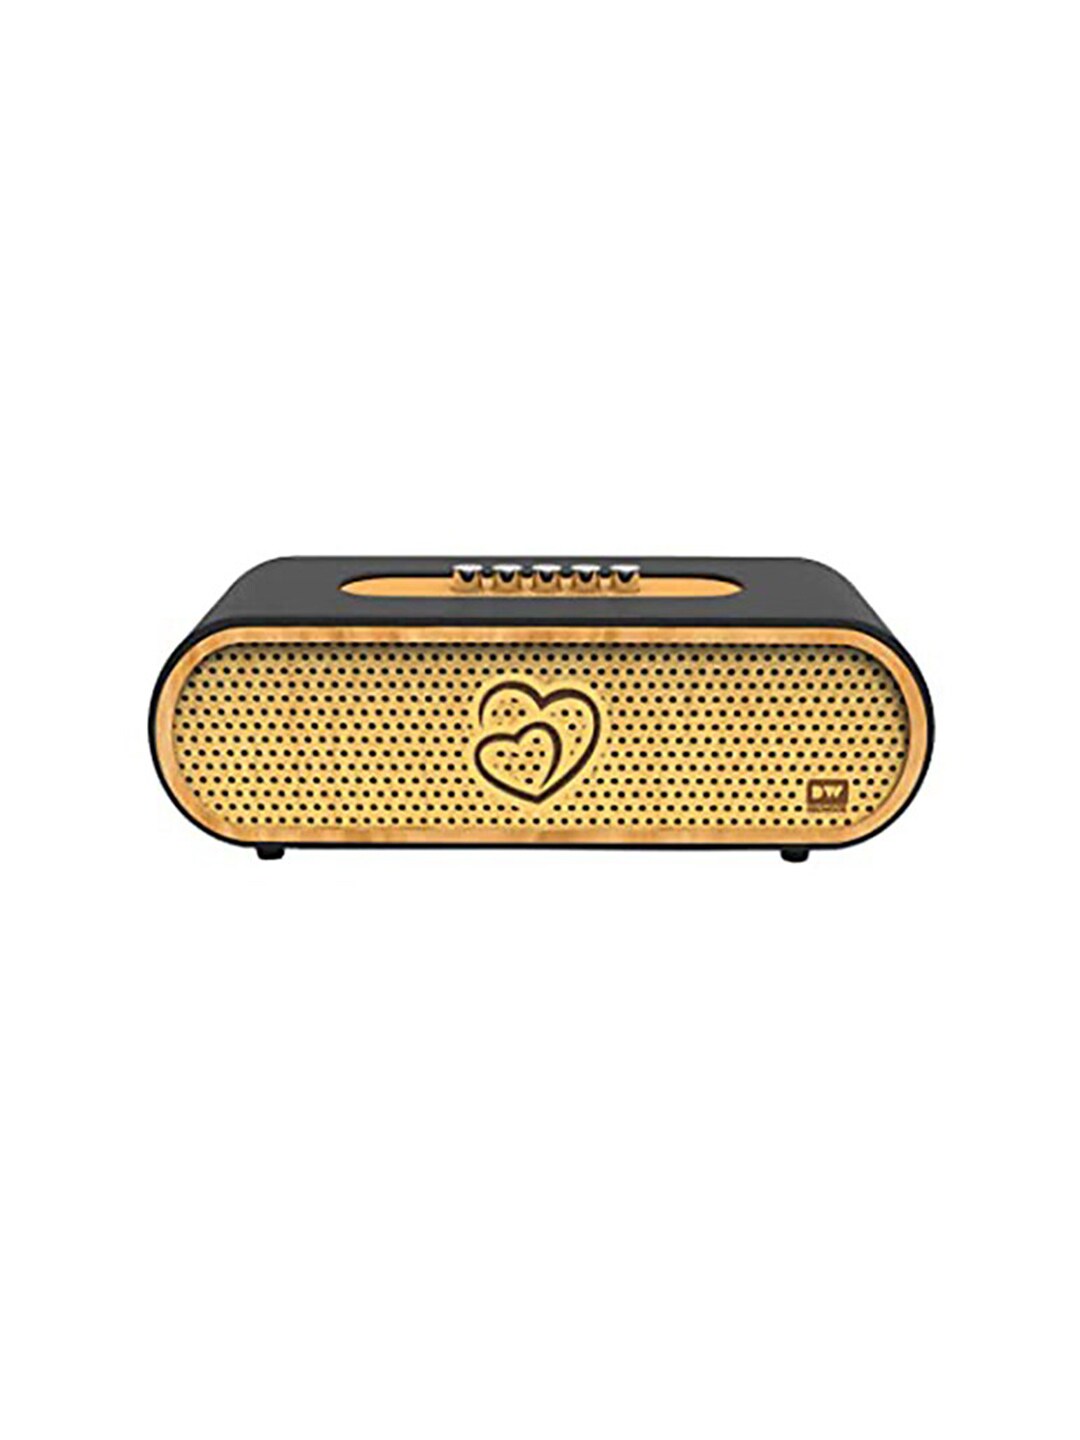 DECIWOOD Black Solid Curved 20W Wooden Portable Bluetooth Speaker Price in India